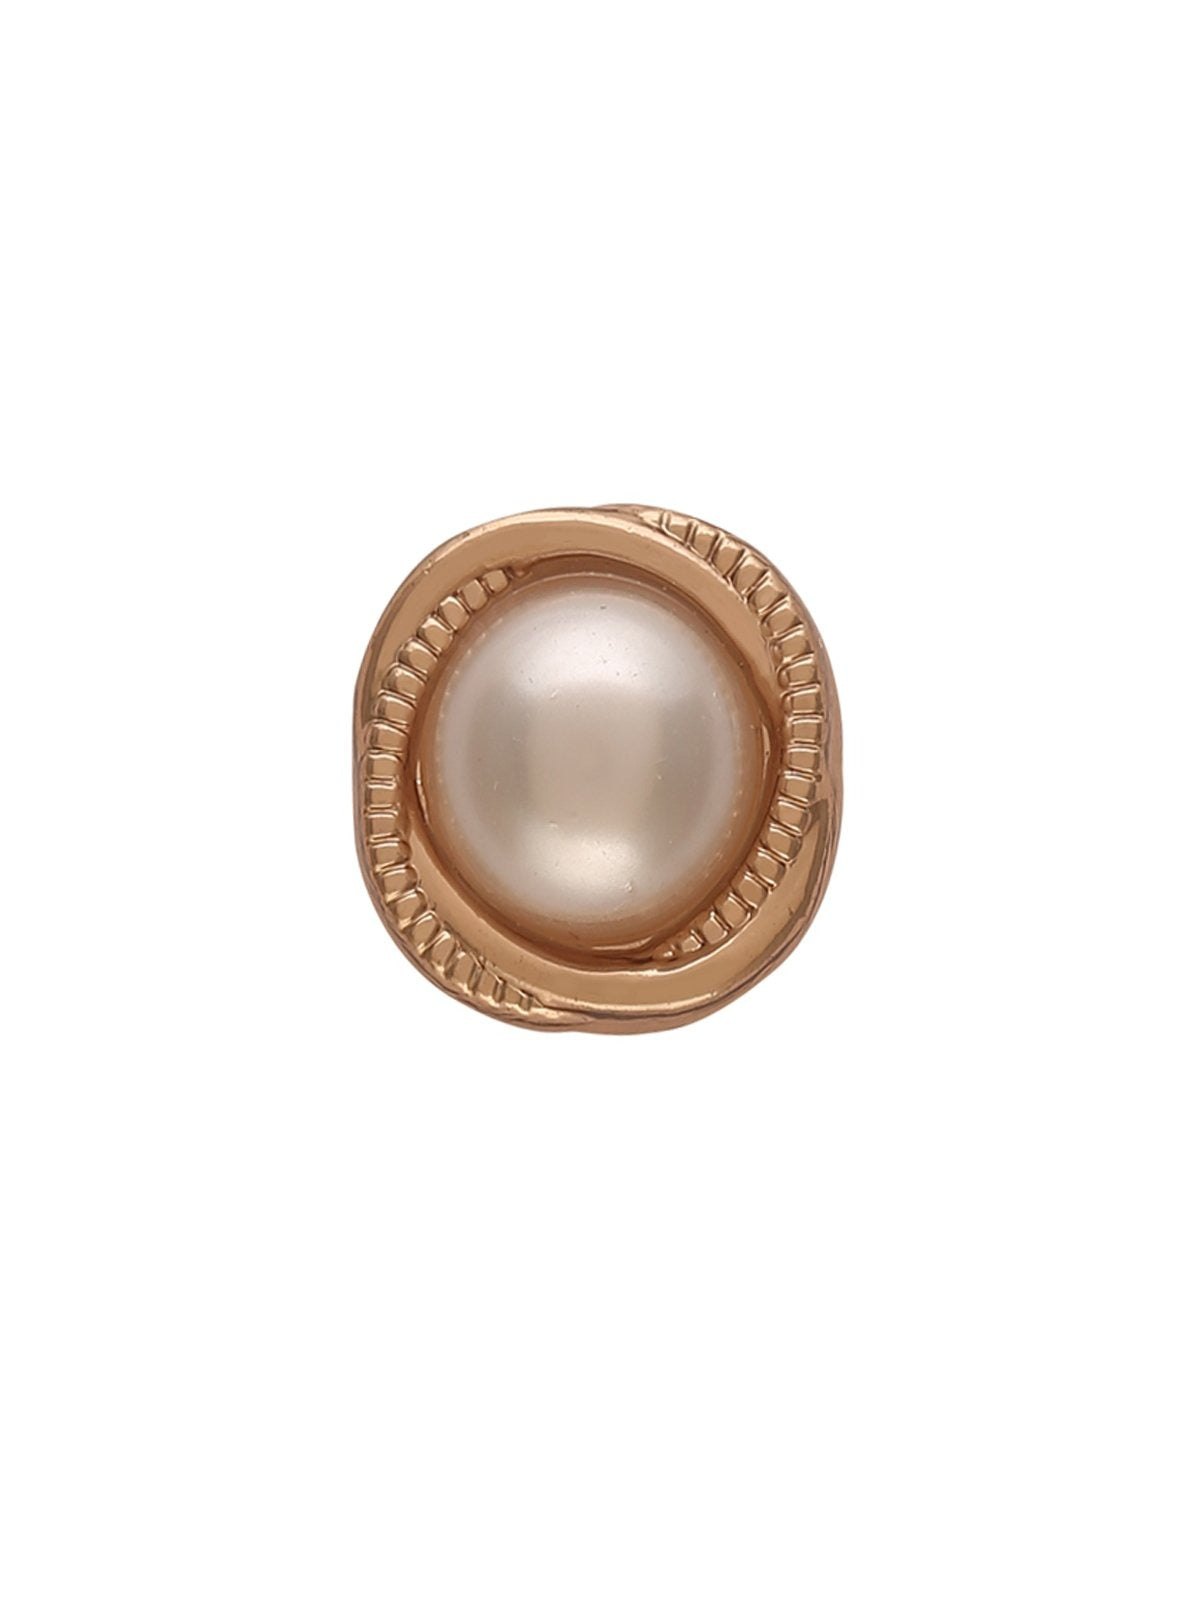 Rounded Square Shape Shiny Pearl Button in Golden Color 